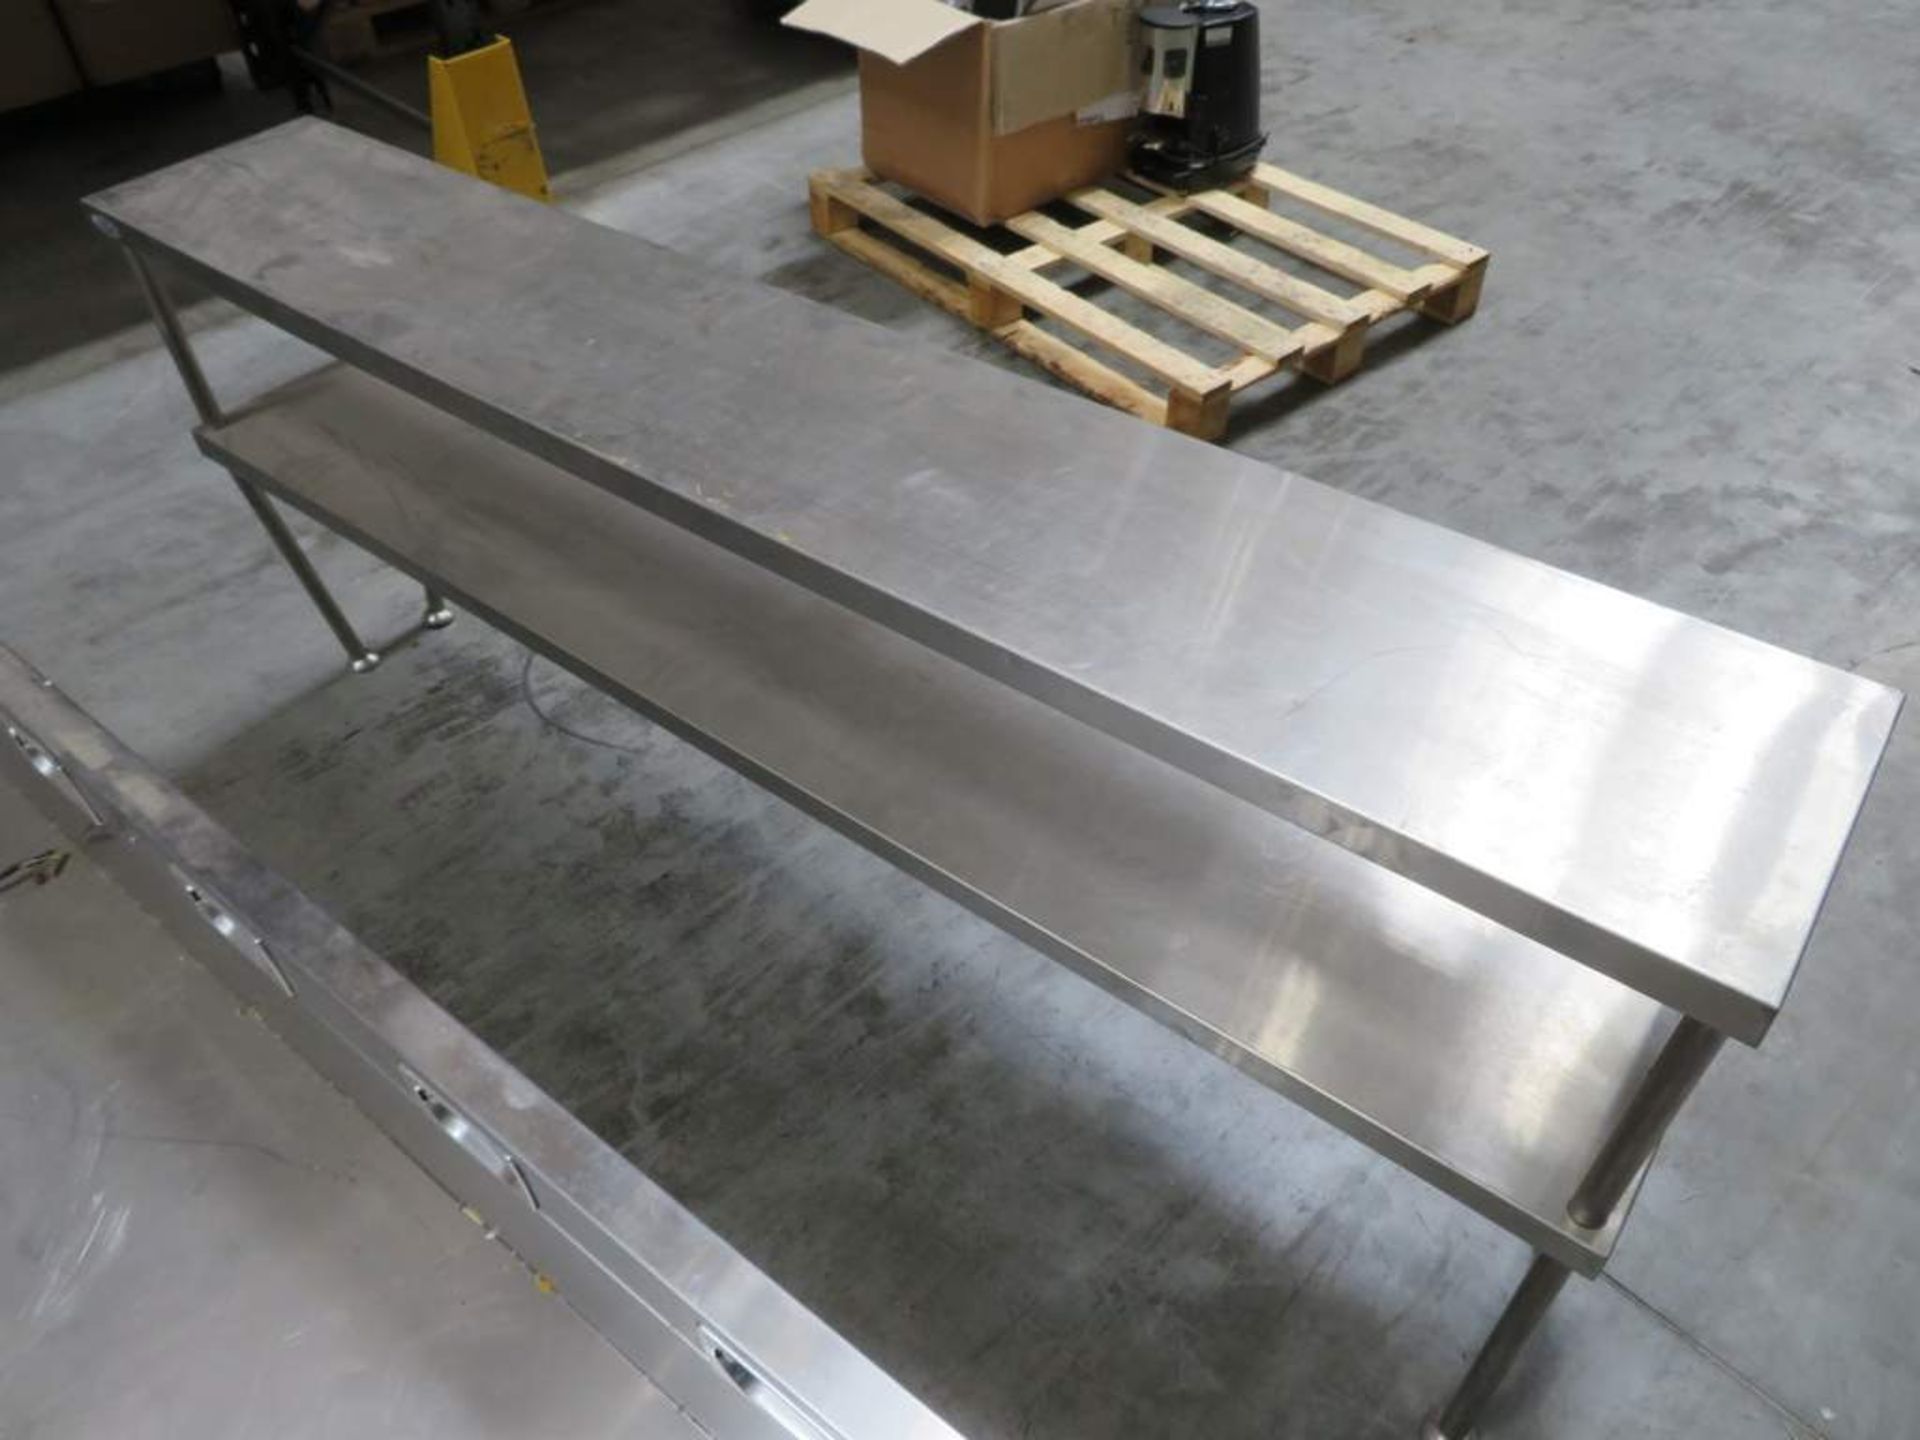 Stainless steep canopy, Counterline stainless steel 2 tier stand and various stainless steel items. - Image 2 of 3